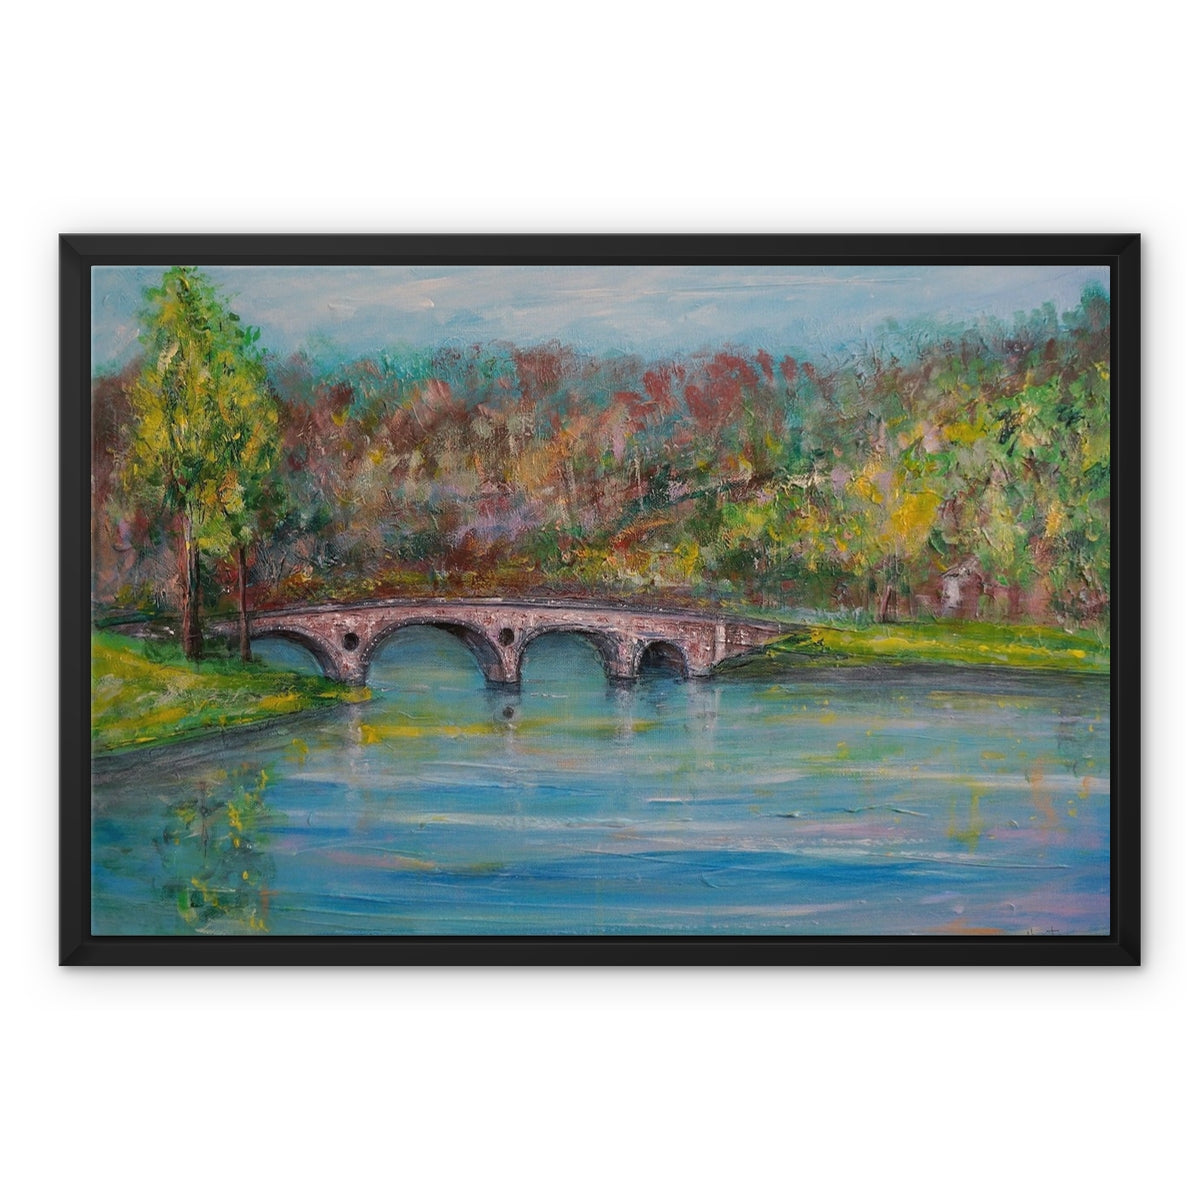 Kenmore Bridge Painting | Framed Canvas-Floating Framed Canvas Prints-Scottish Highlands & Lowlands Art Gallery-24"x18"-Black Frame-White Wrap-Paintings, Prints, Homeware, Art Gifts From Scotland By Scottish Artist Kevin Hunter